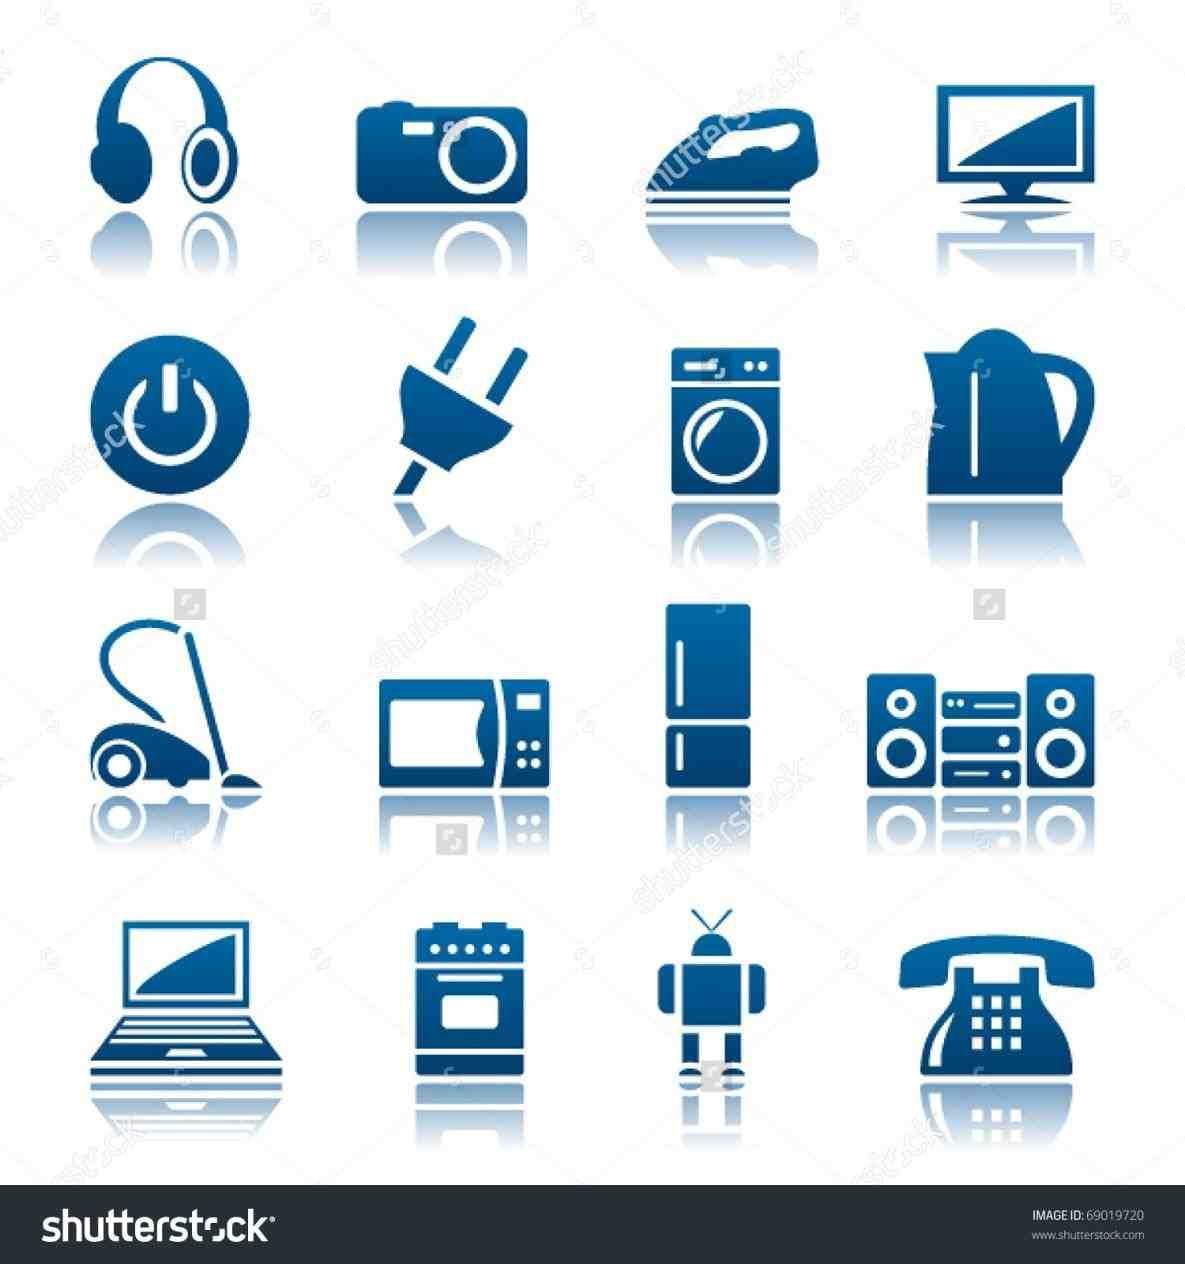 Home Appliance Logo - icon home symbol stock vector appliance care repairs wellingtonnz ...